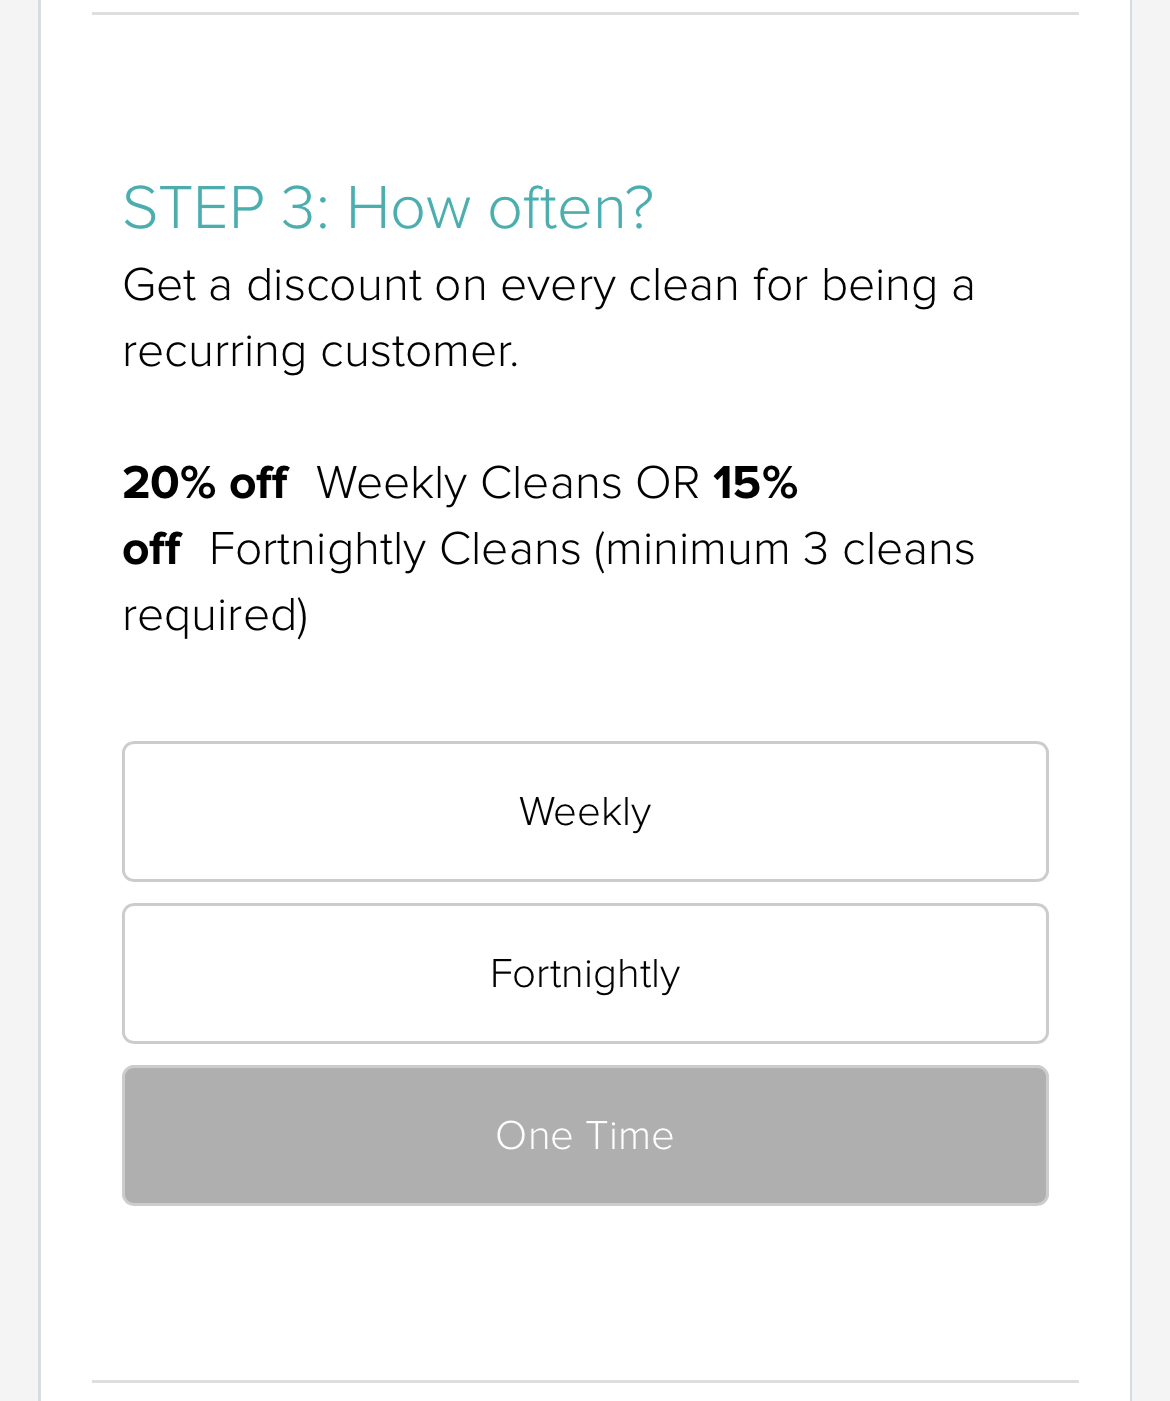 Choose a weekly or fortnightly clean for a recurring discount